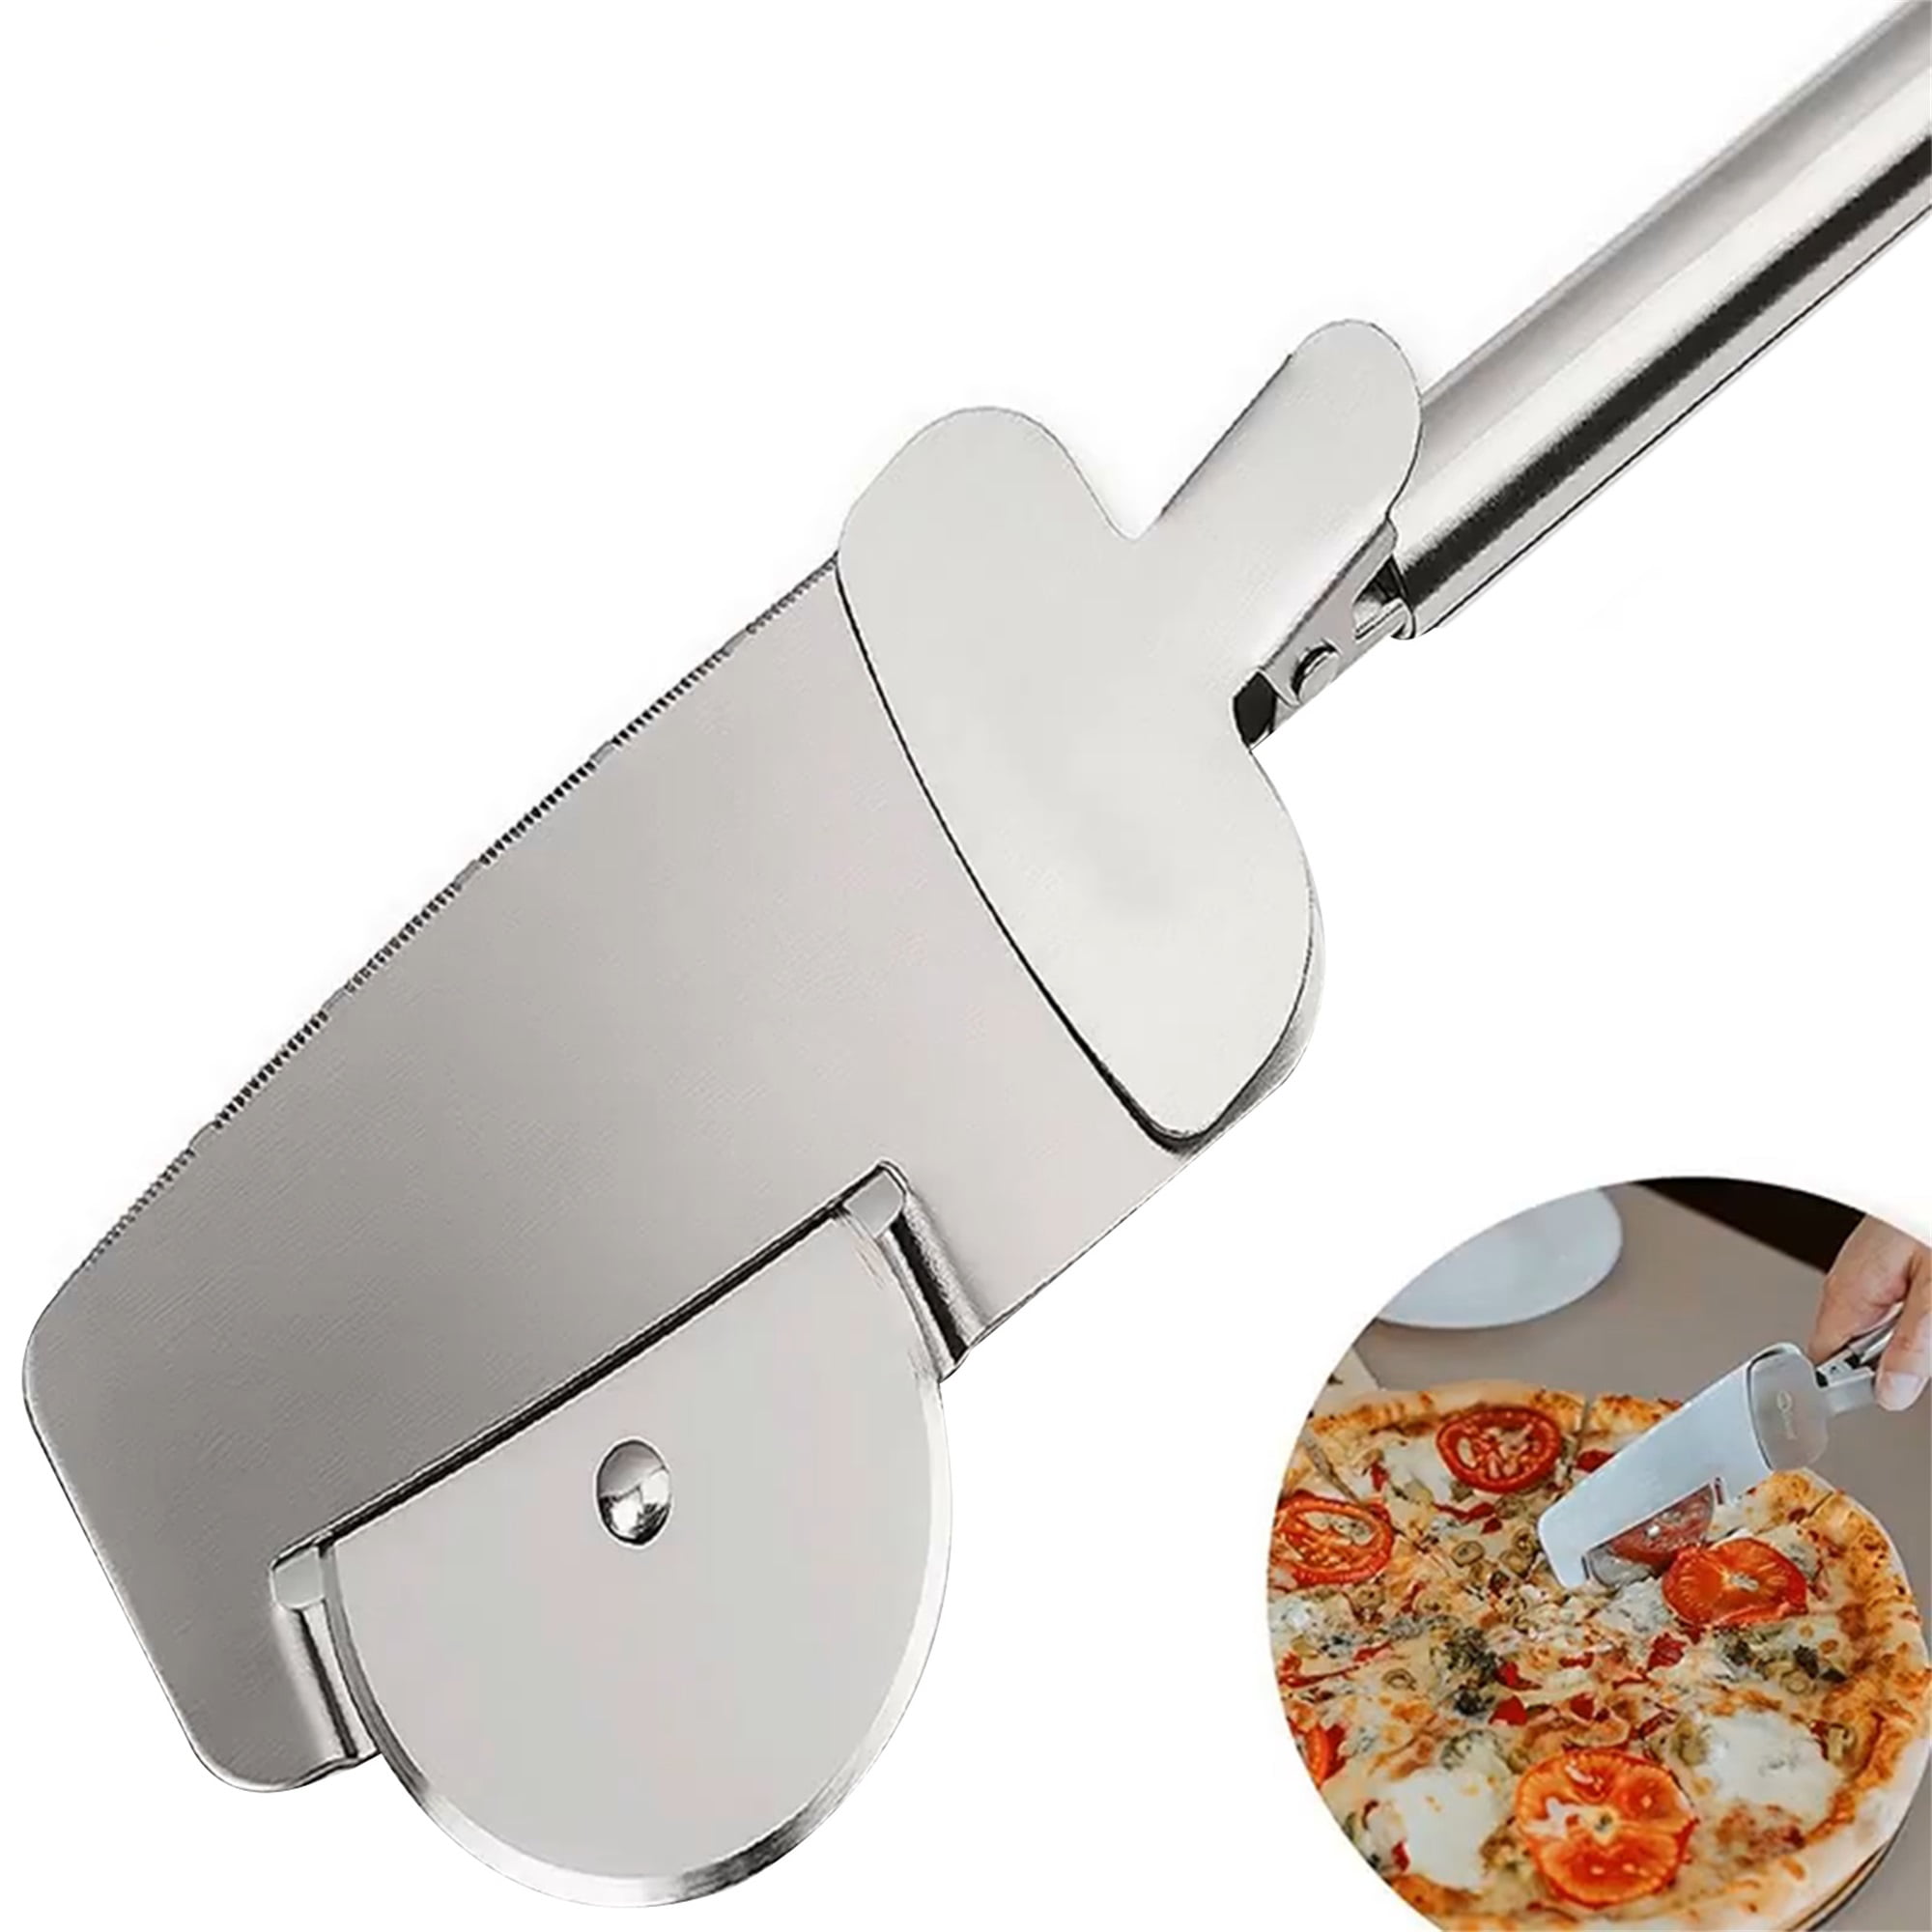 Commercial 5"inch Heavy Duty Stainless-steel Pizza Cutter Wheel Slicer 